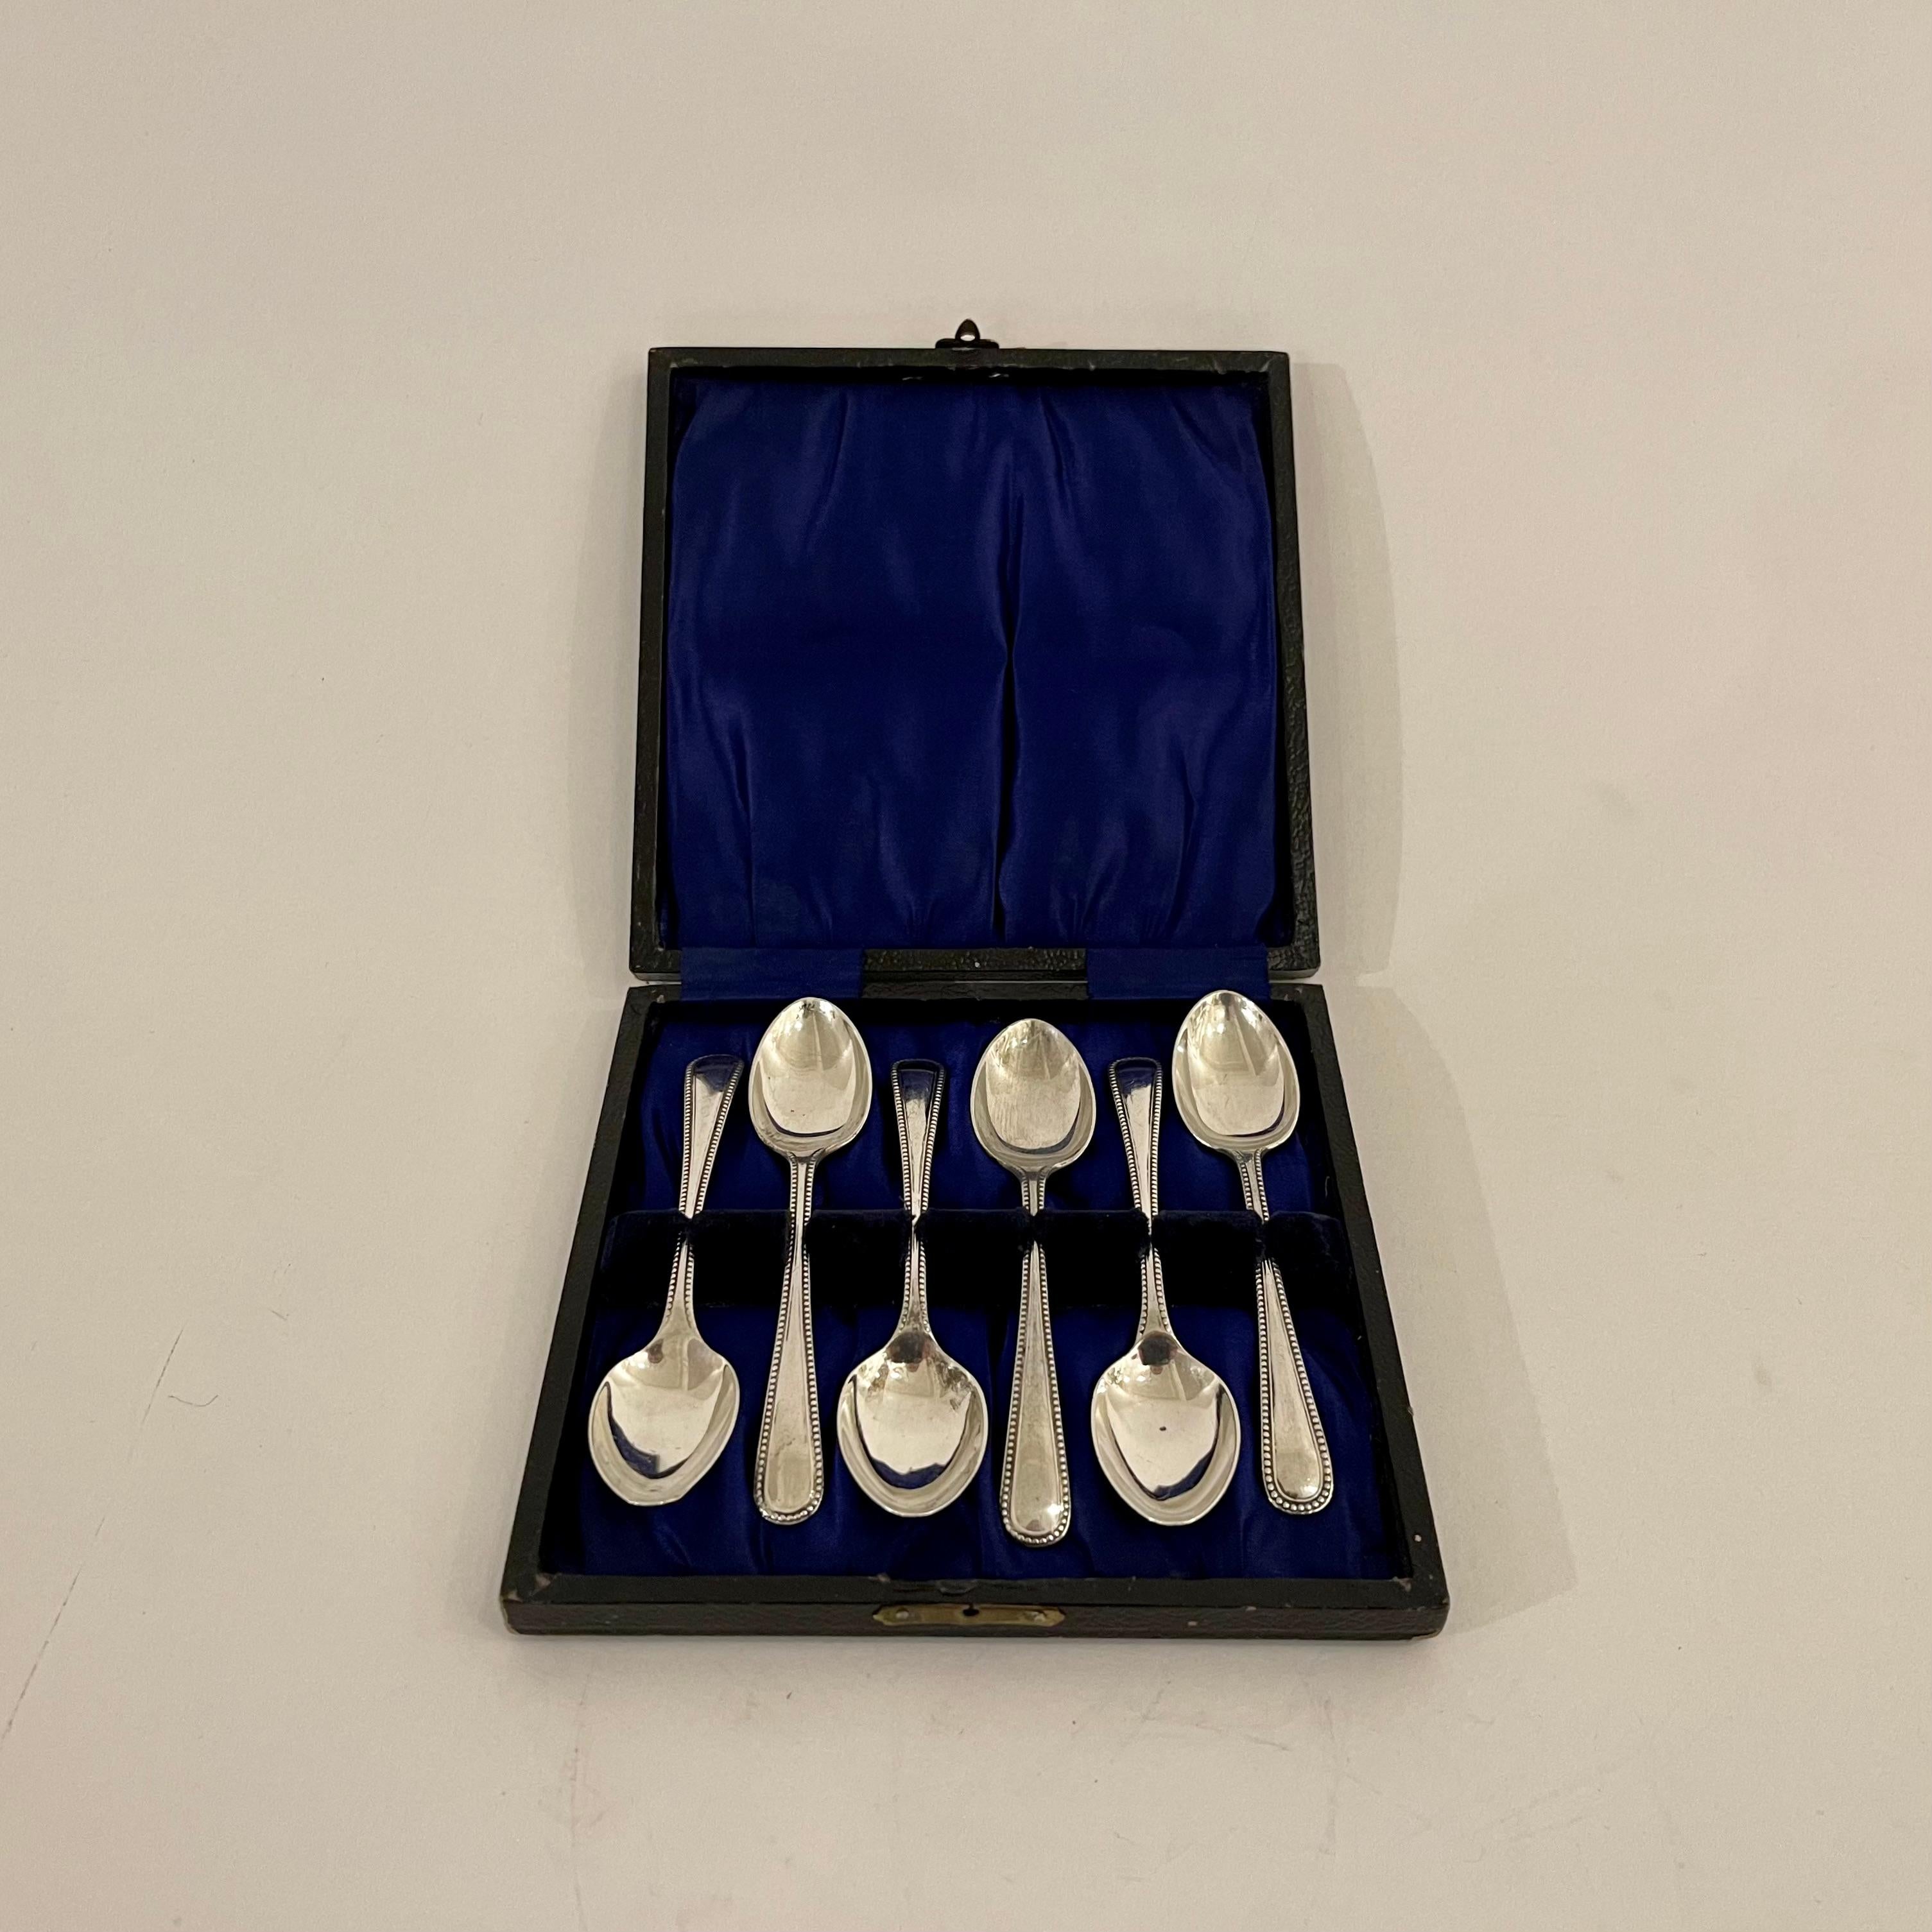 This set of six solid sterling silver teaspoons from 1926, by Joseph Lyddiatt of Birmingham, are presented in the original black leather box in which they were sold. The interior of the box is lined in a deep blue silk-satin fabric which